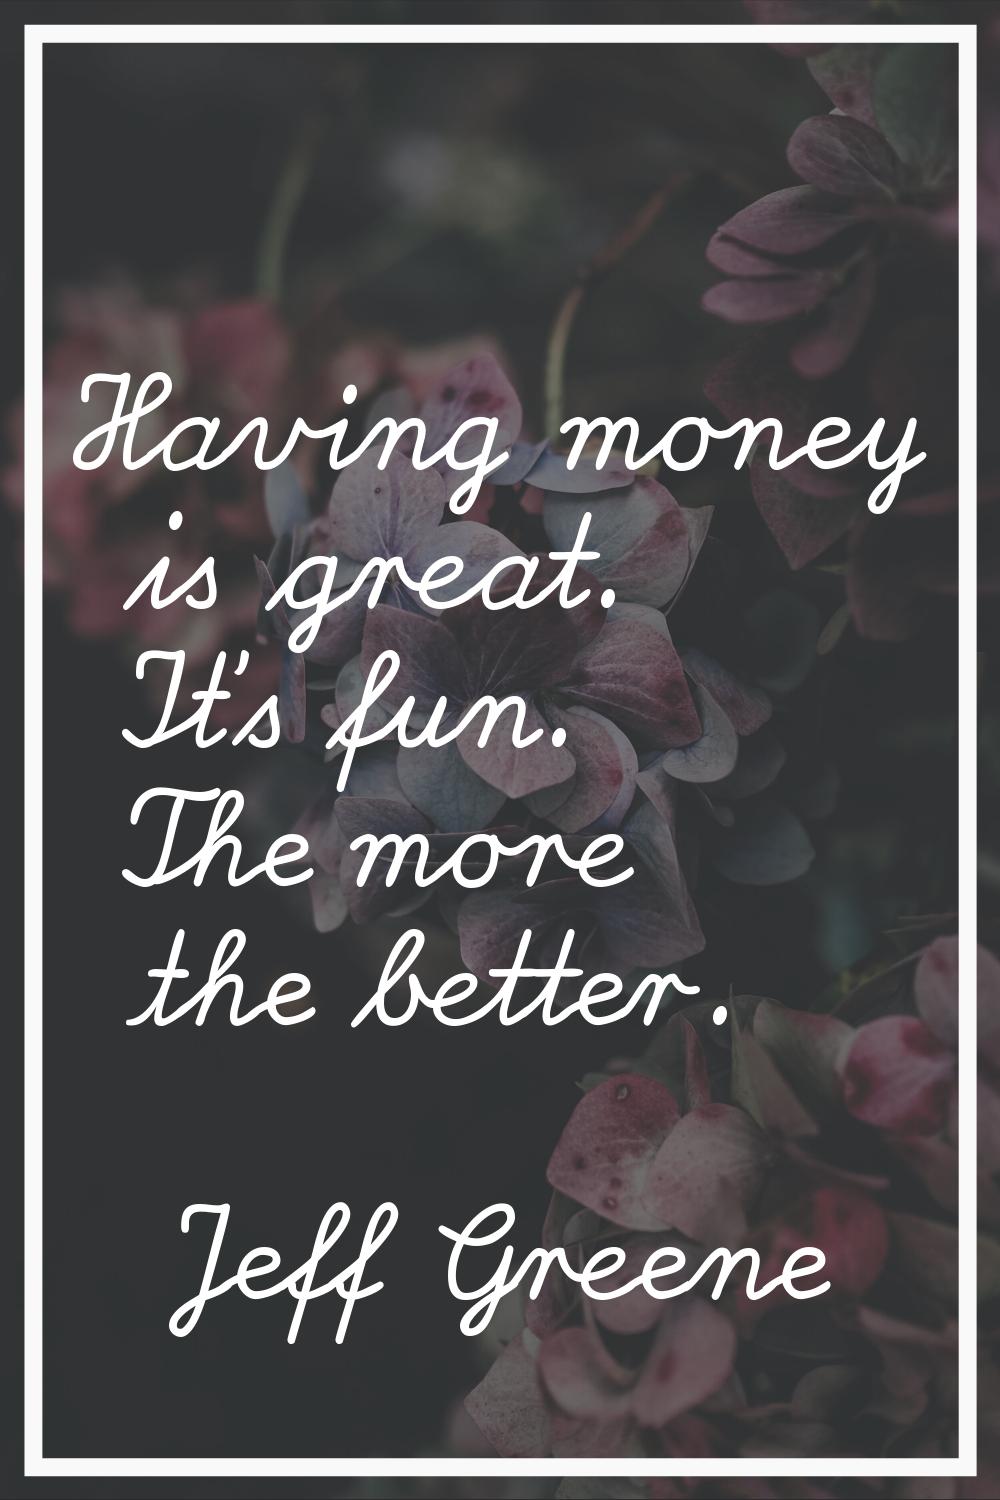 Having money is great. It's fun. The more the better.